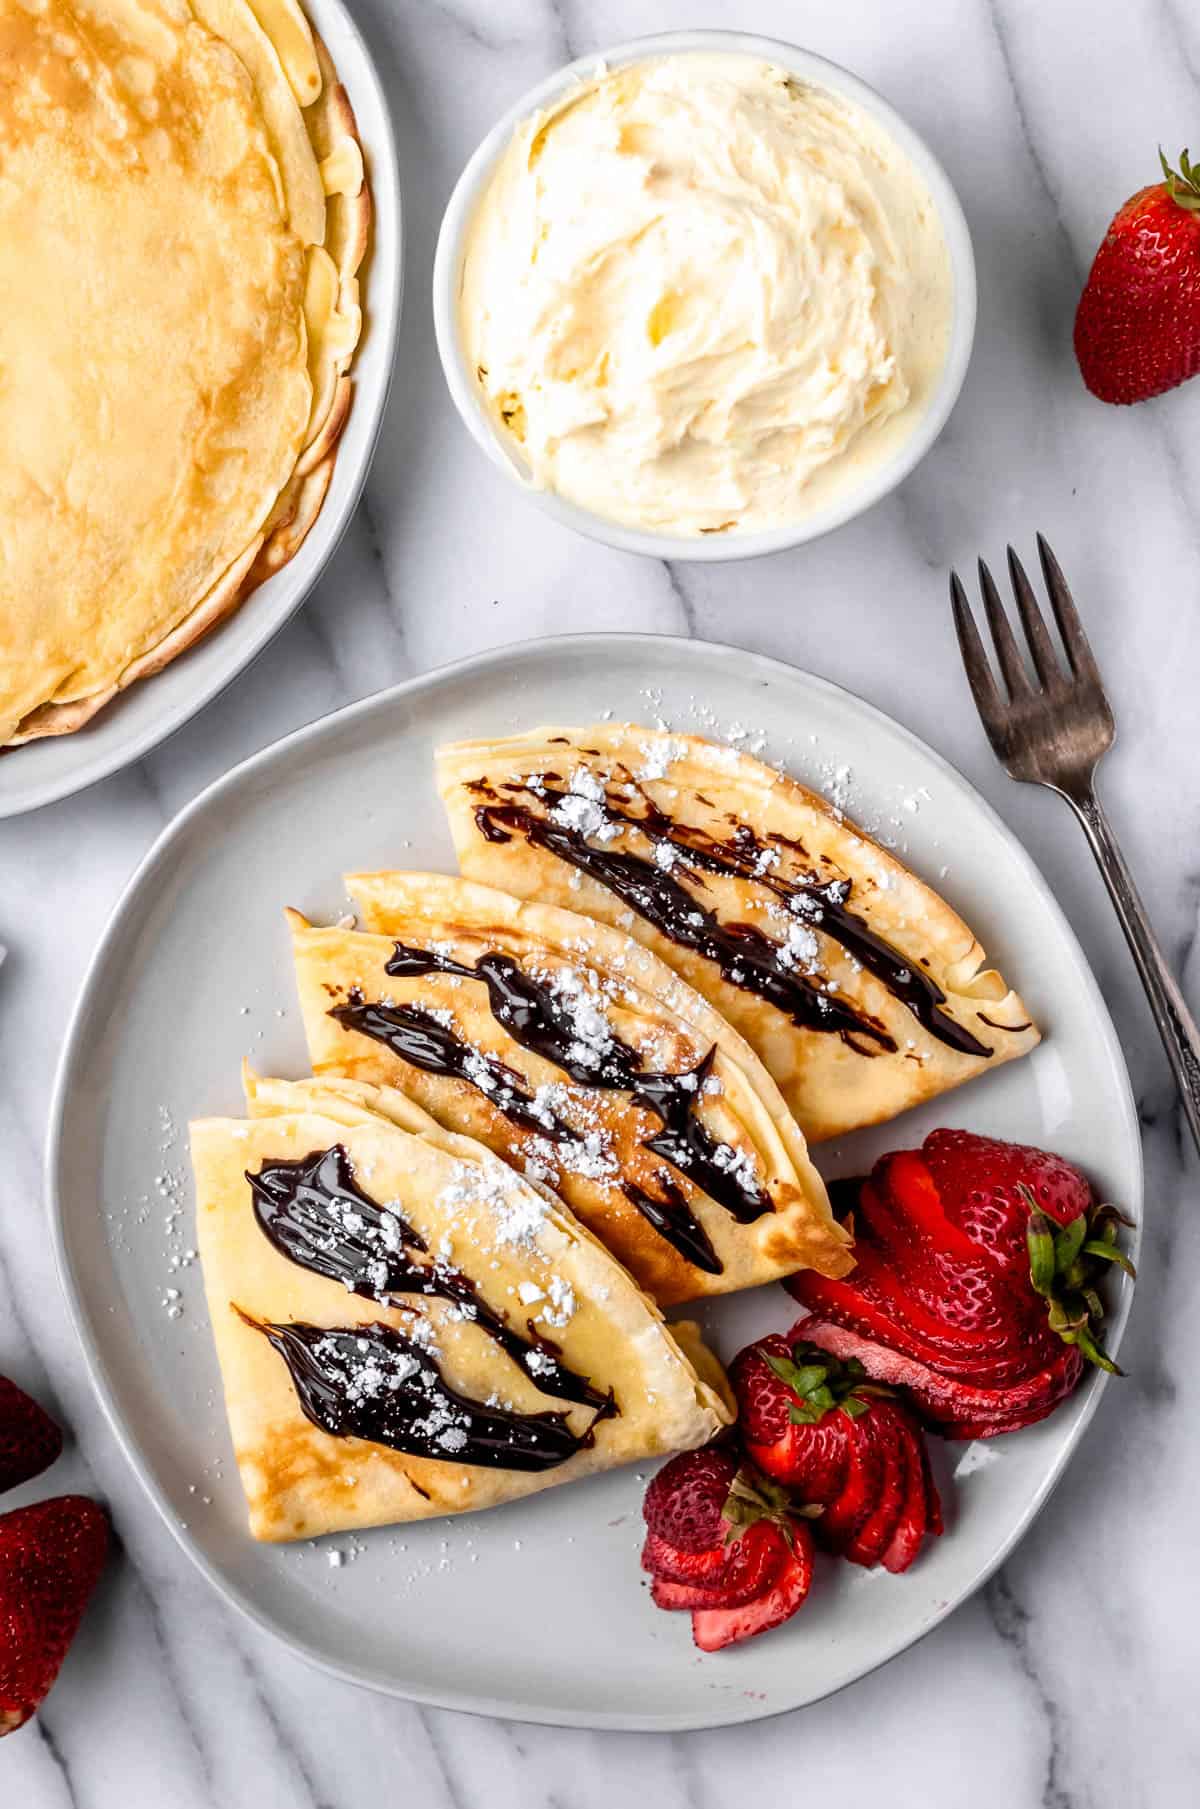 Overhead of a plate of sweet crepes with strawberries, a bowl of pastry cream and a plate of plain crepes around it.